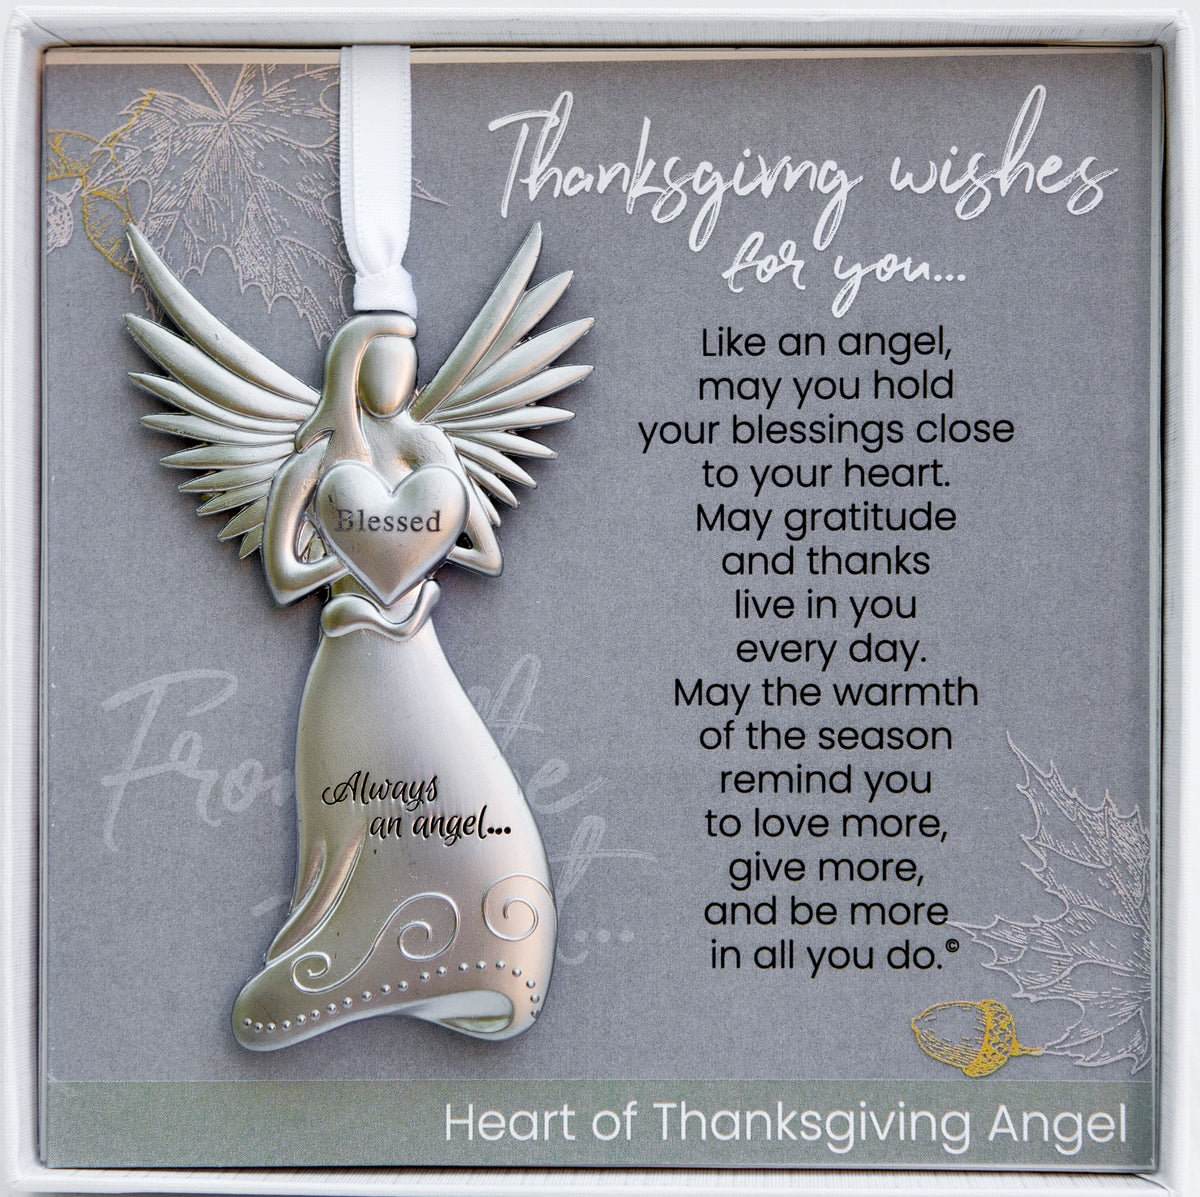 Thanksgiving Gift - 4" blessed metal angel ornament with Thanksgiving sentiment, boxed in white box with clear lid